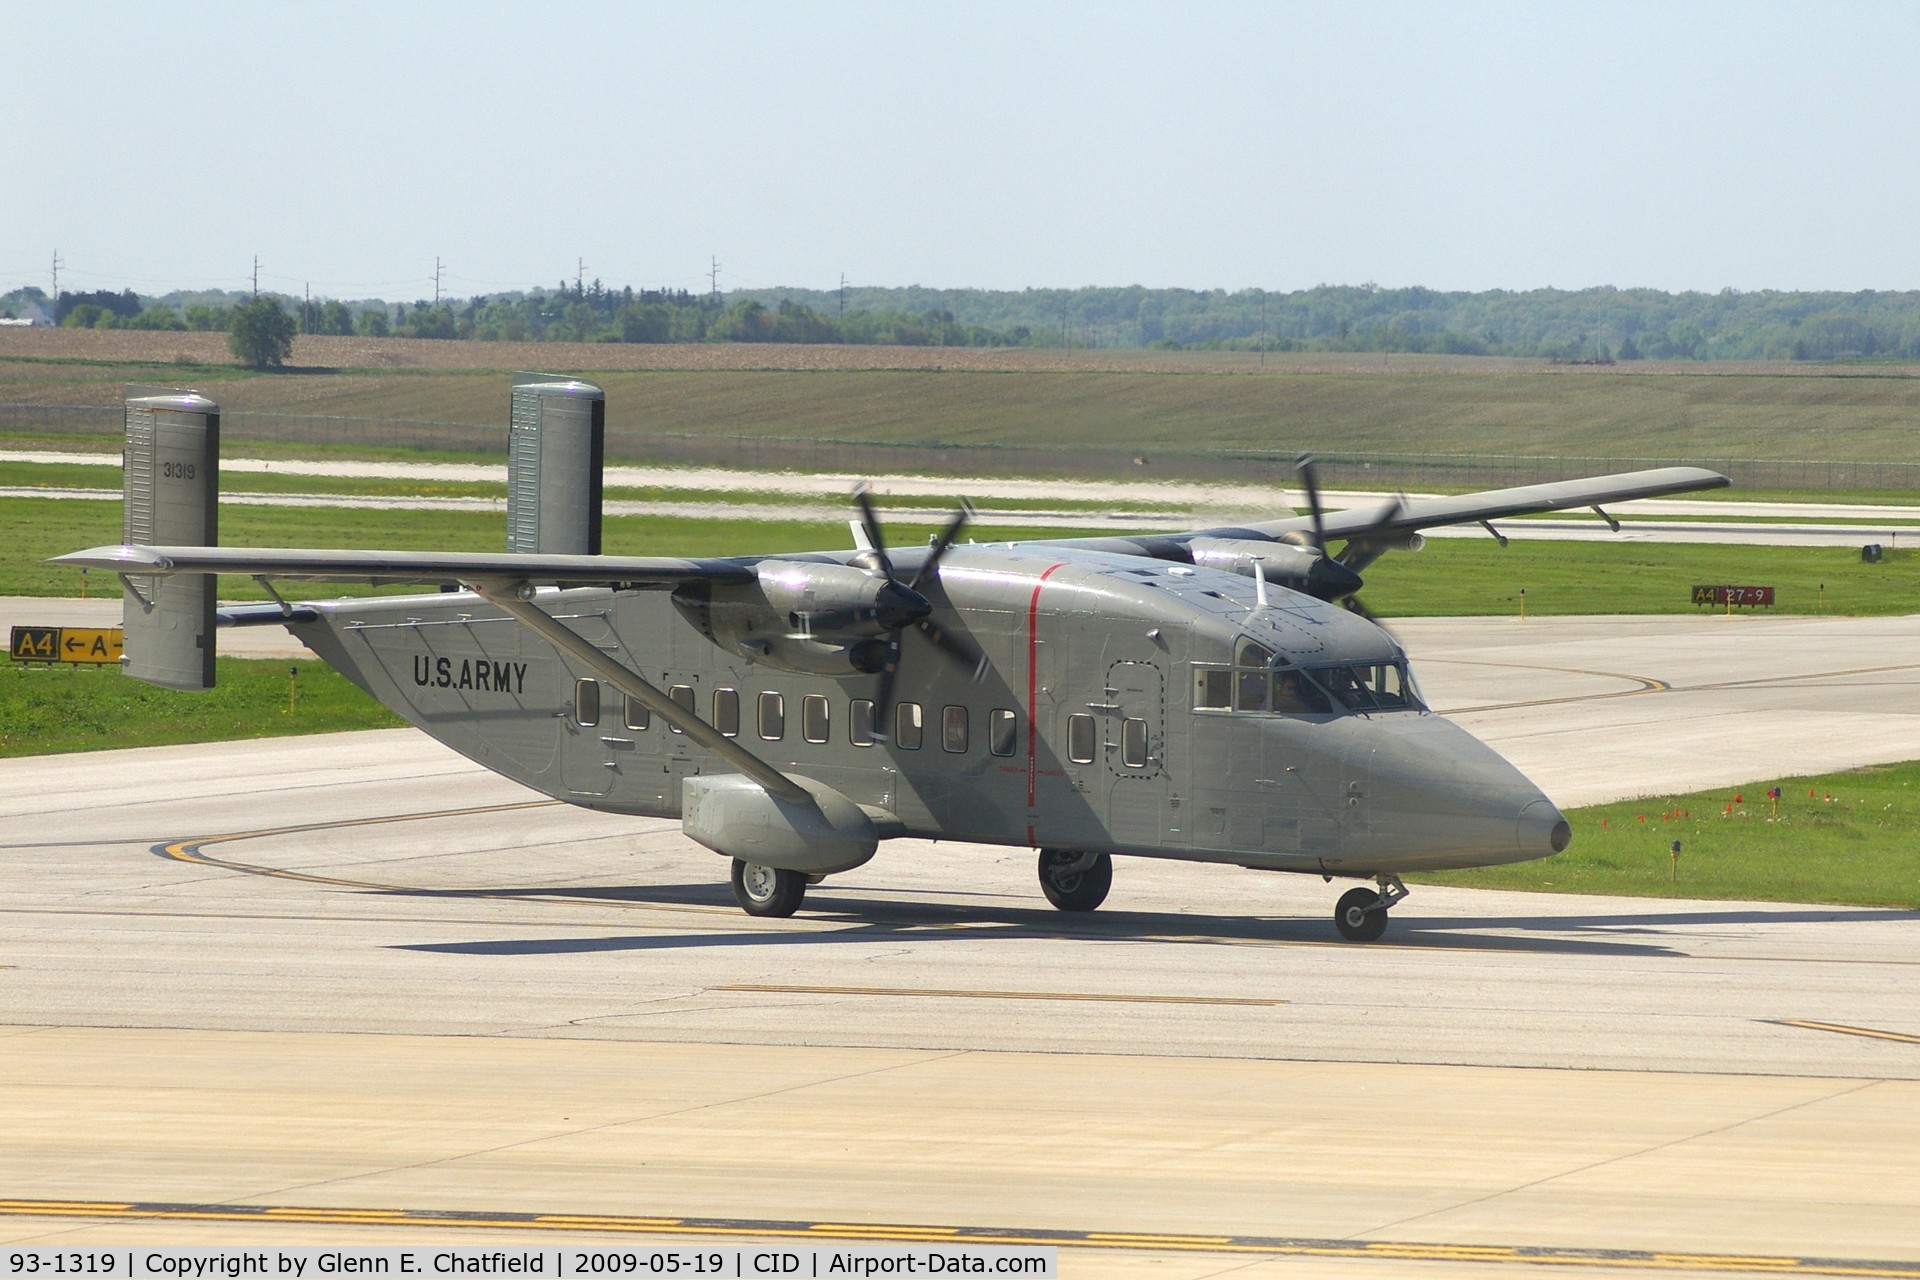 93-1319, 1993 Short C-23B Sherpa C/N AK-003, Turning onto Delta from Alpha 4 on the way to Rockwell-Collins